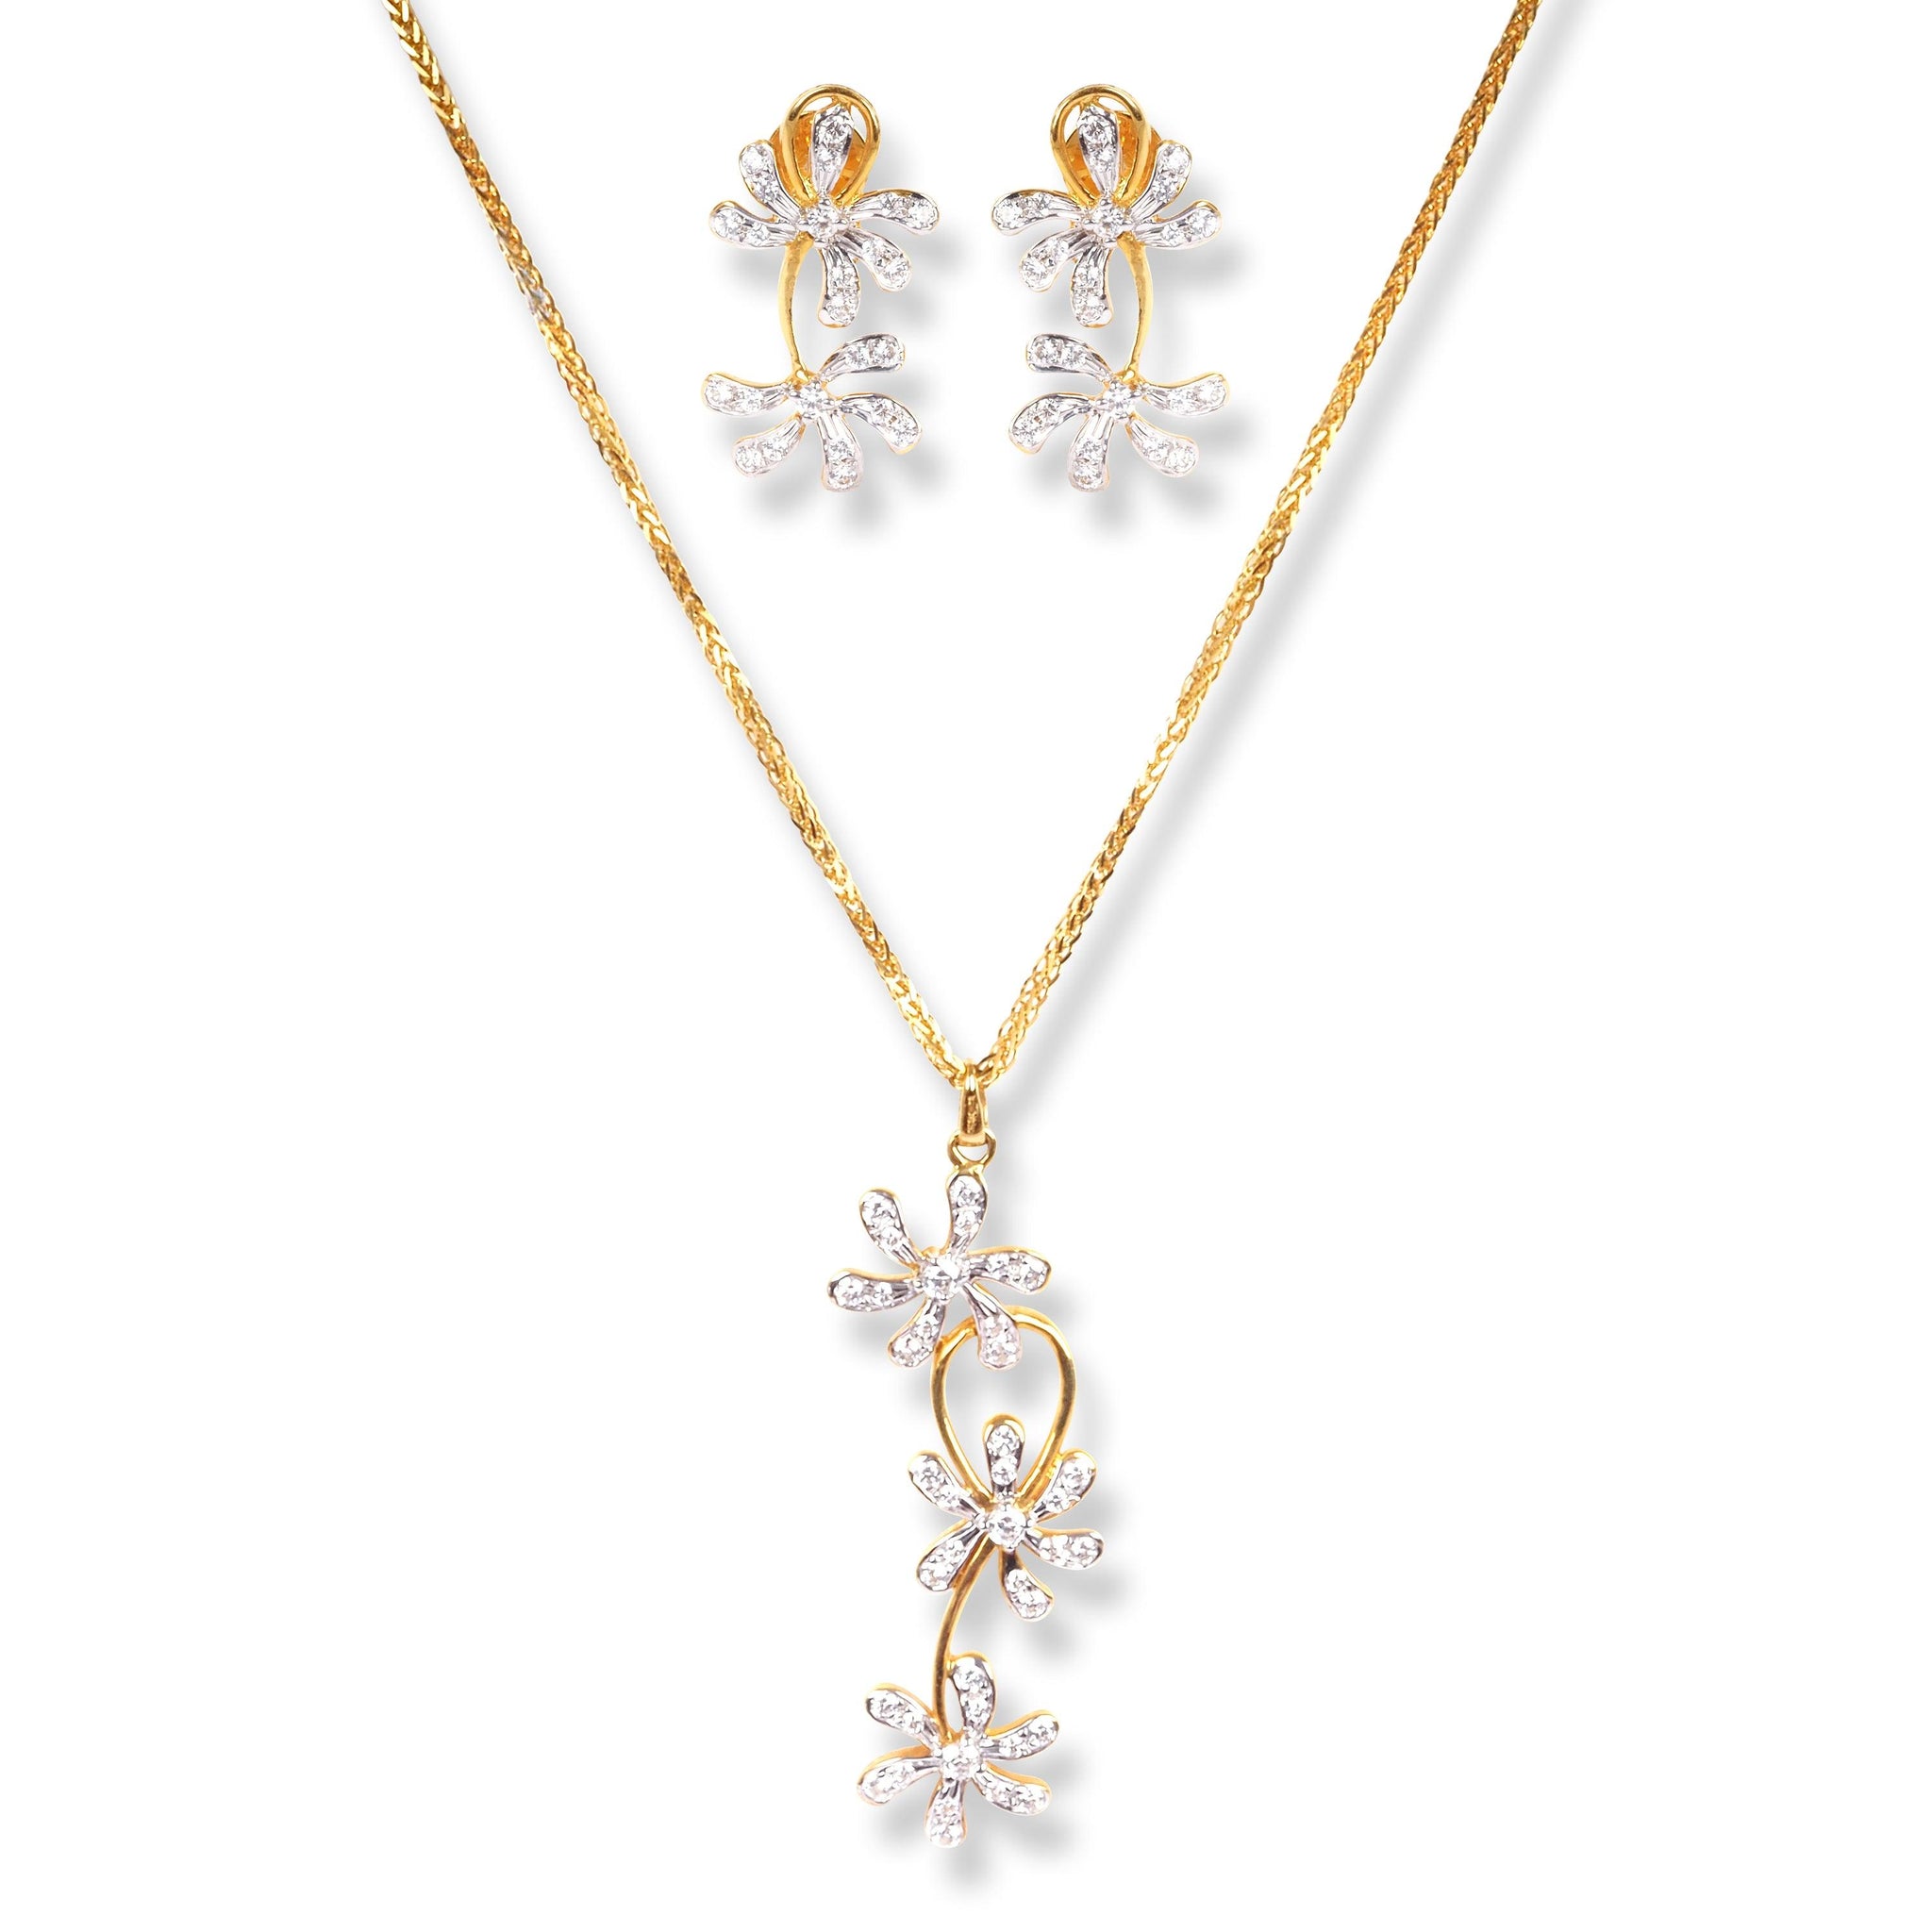 18ct Yellow Gold Floral Design Set with Cubic Zirconia Stones (Pendant + Chain + Stud Earrings)